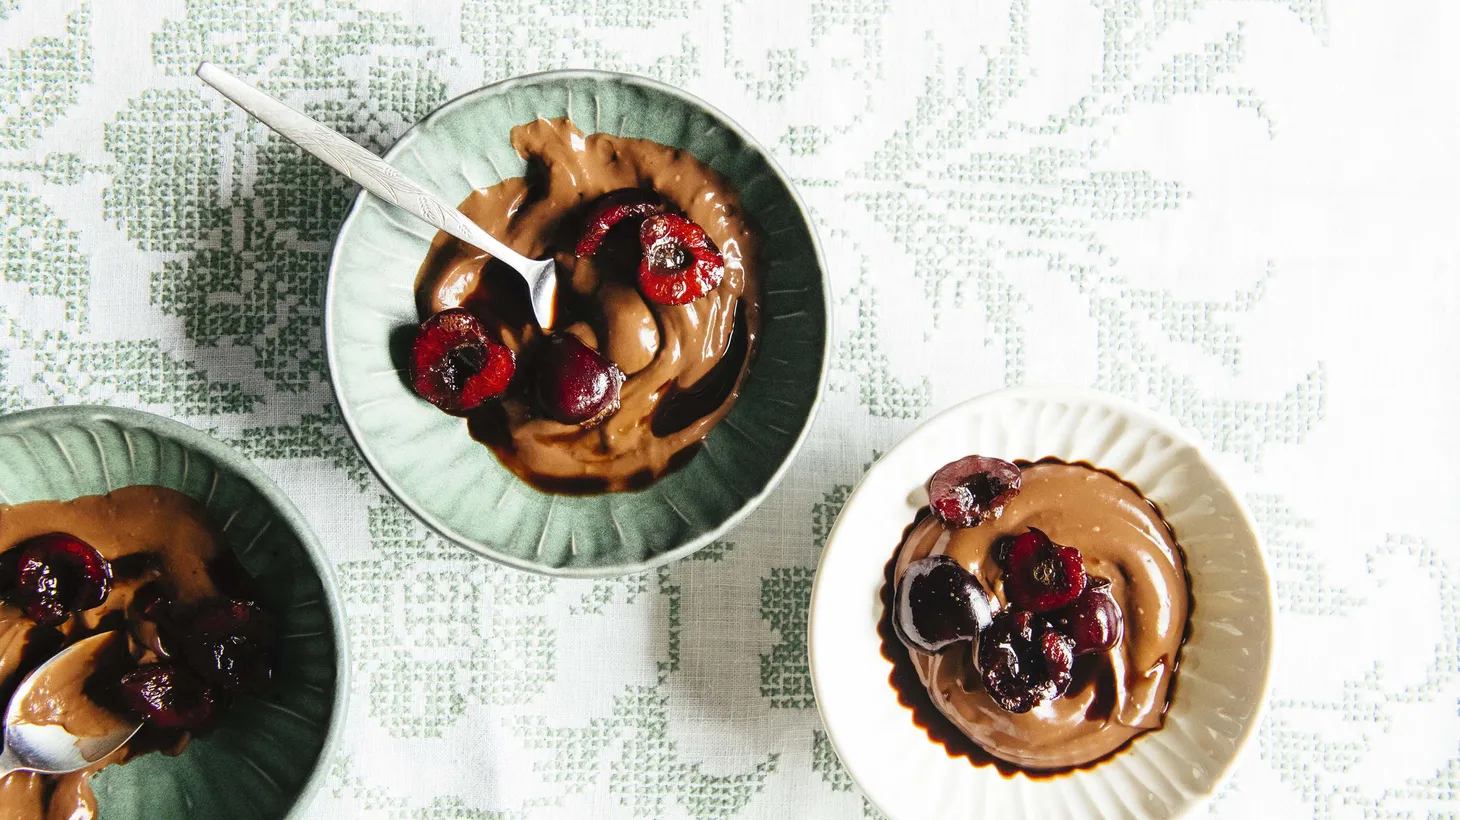 This chocolate pudding with coffee-soaked black cherries calls for Bing or Nelson cherries to be soaked in a coffee and sugar mixture then tossed with ground coffee, brown sugar, and ginger.